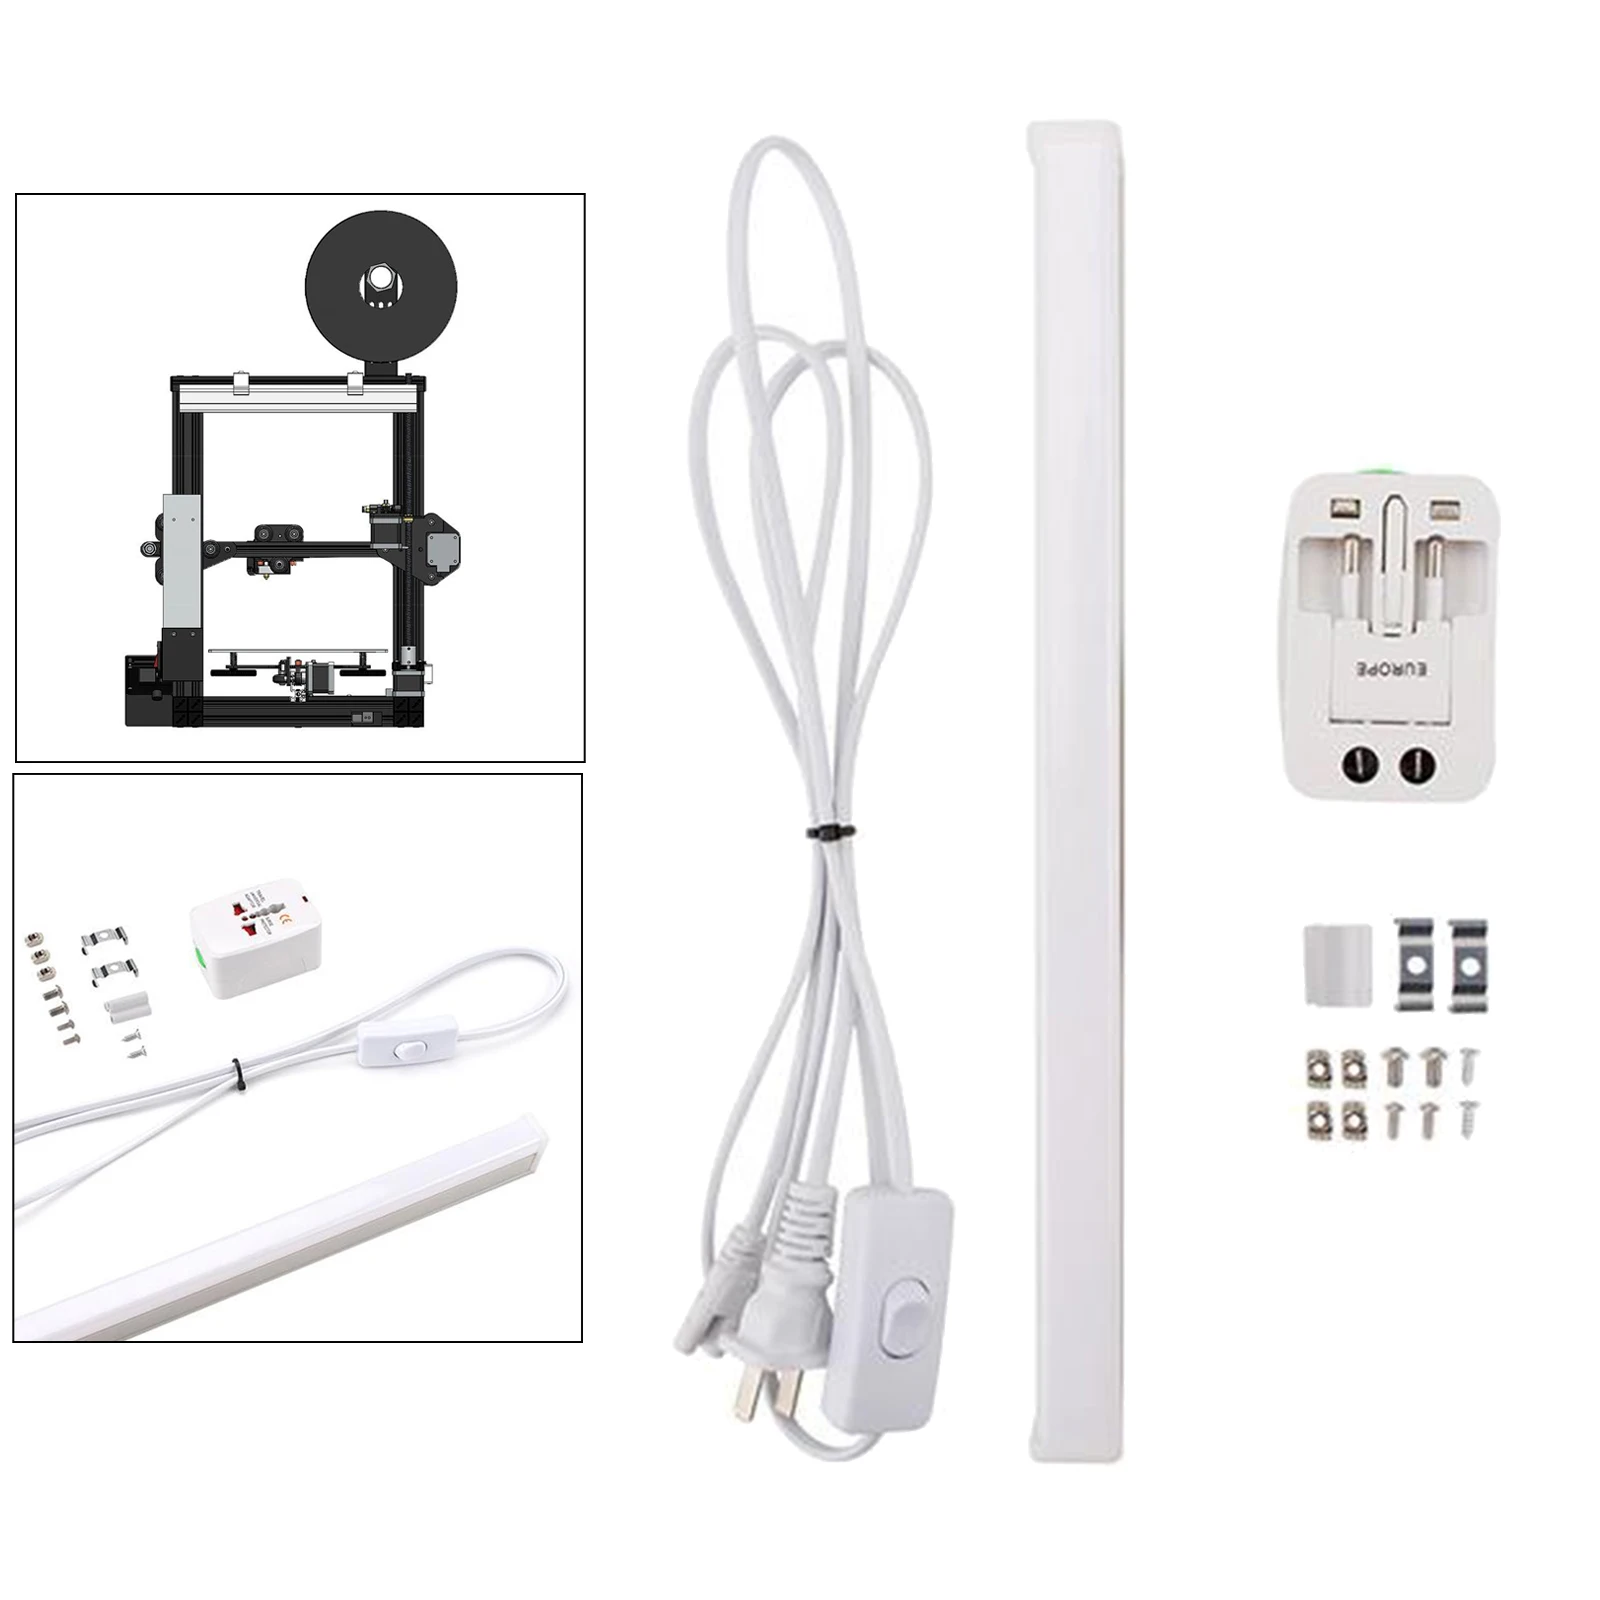 LED Tube Night Light Kit with Switch Cable for CR-10 CR-10 4S CR-10 5S